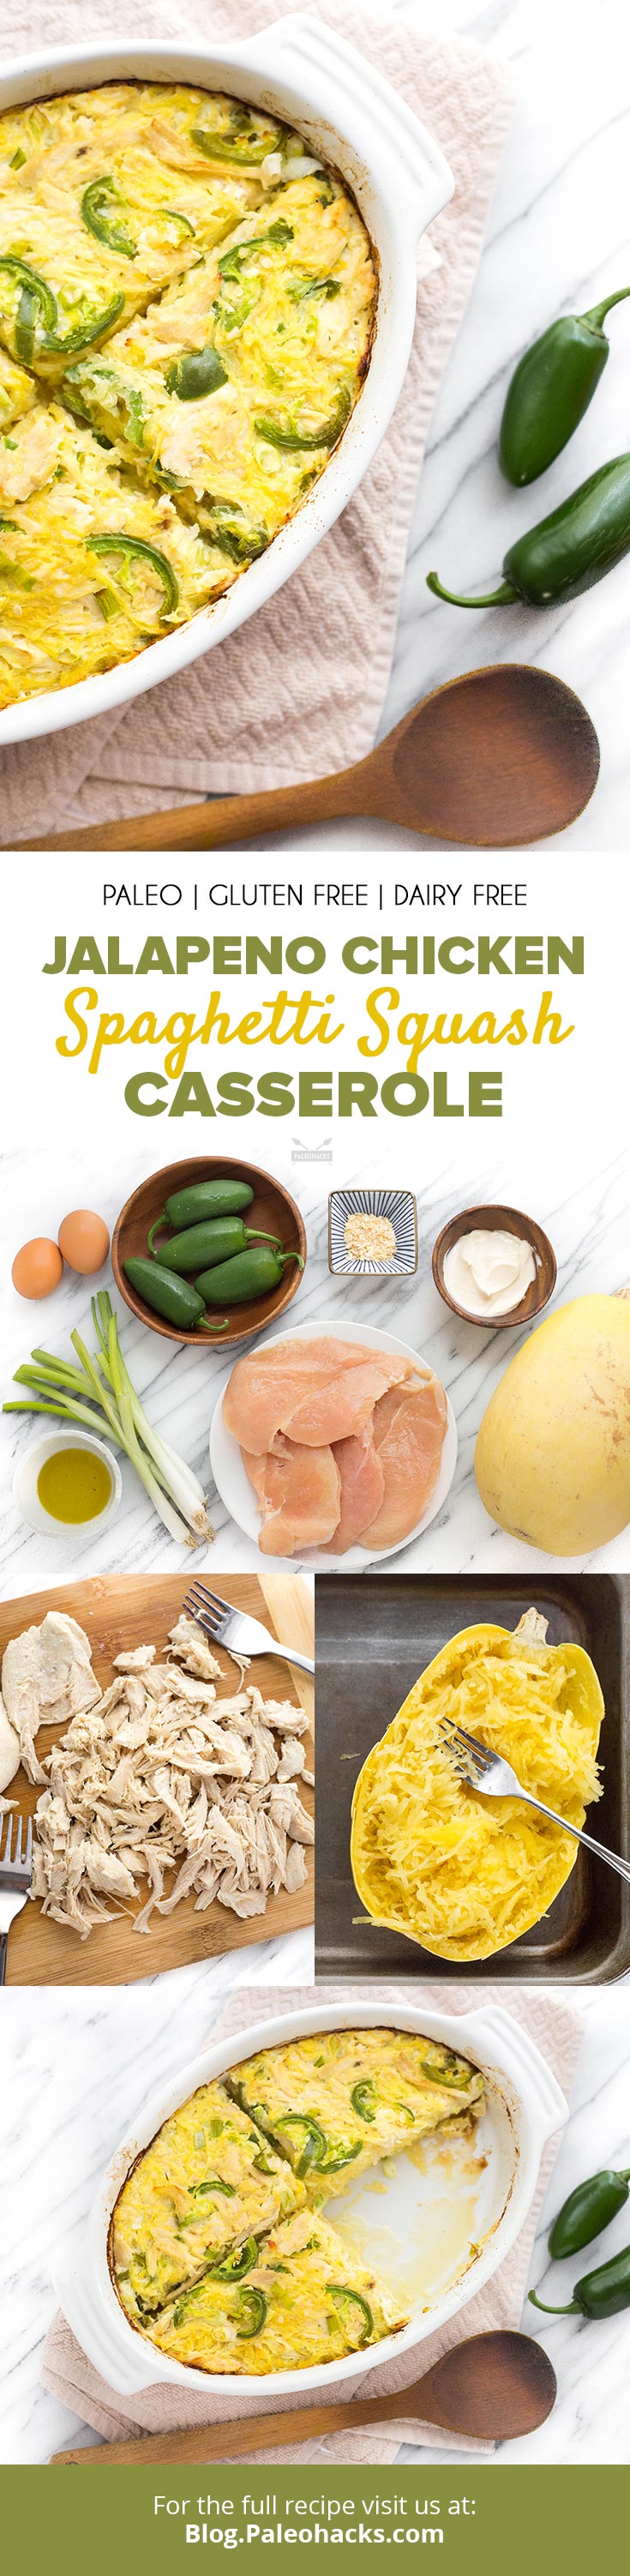 Combine spaghetti squash with spicy jalapeño chicken for a casserole dish you can easily warm up to. Serving up the heat, one dish at a time!